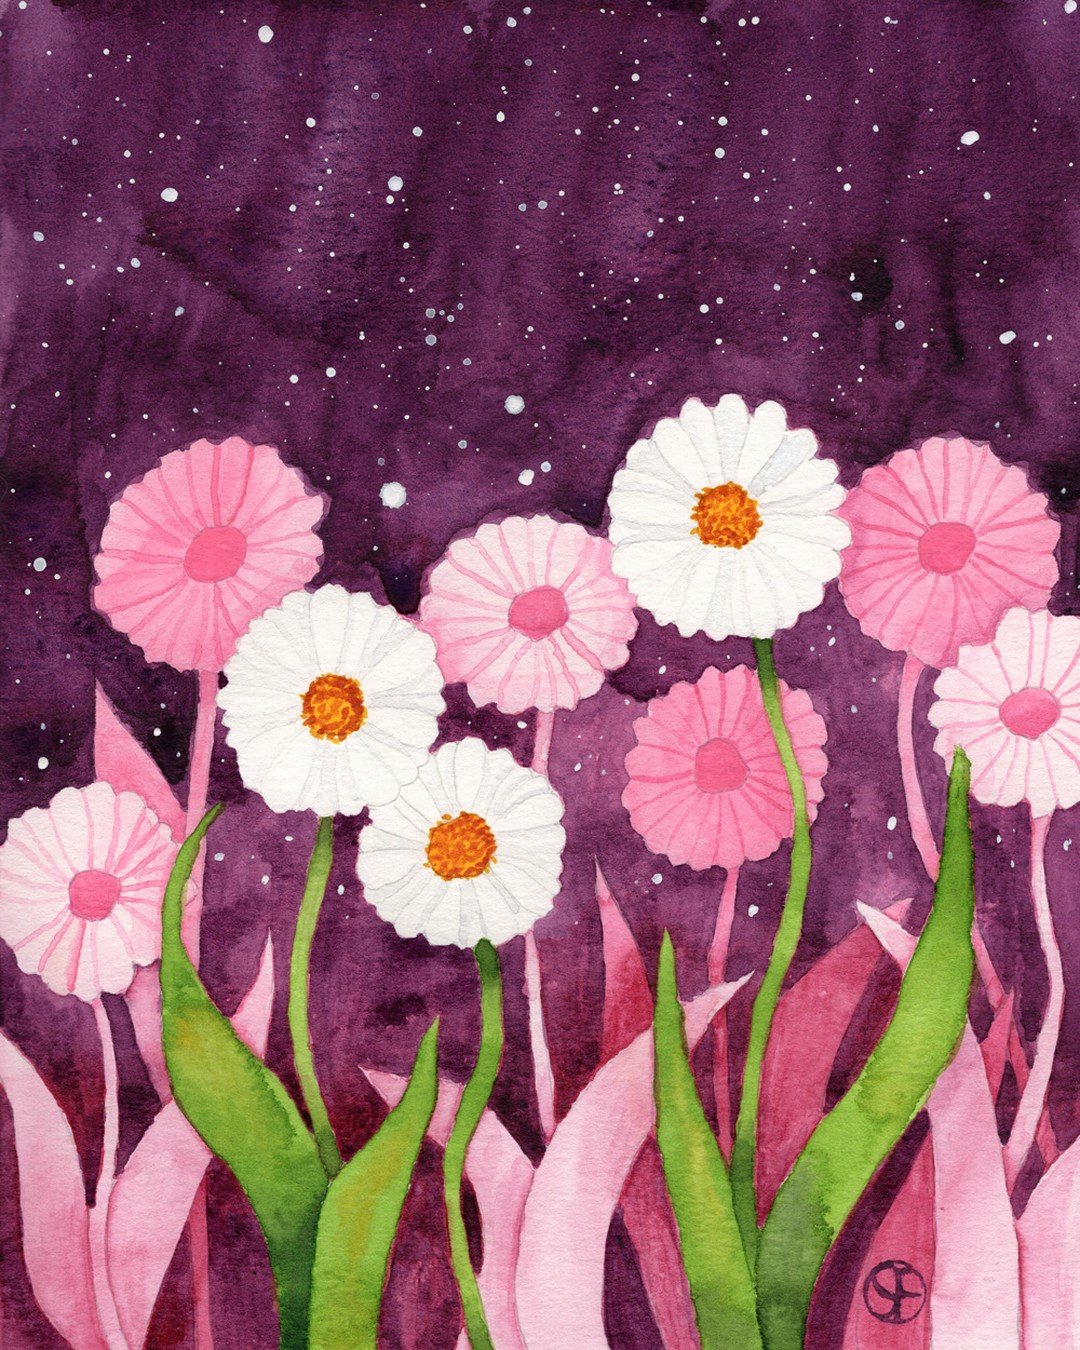 Daisies at night. I painted this as a negative space painting with a few layers of gradients. I was inspired to paint daisies after talking with one of my nieces about her favorite flowers. She also likes pinks and purples so I decided to use the sam